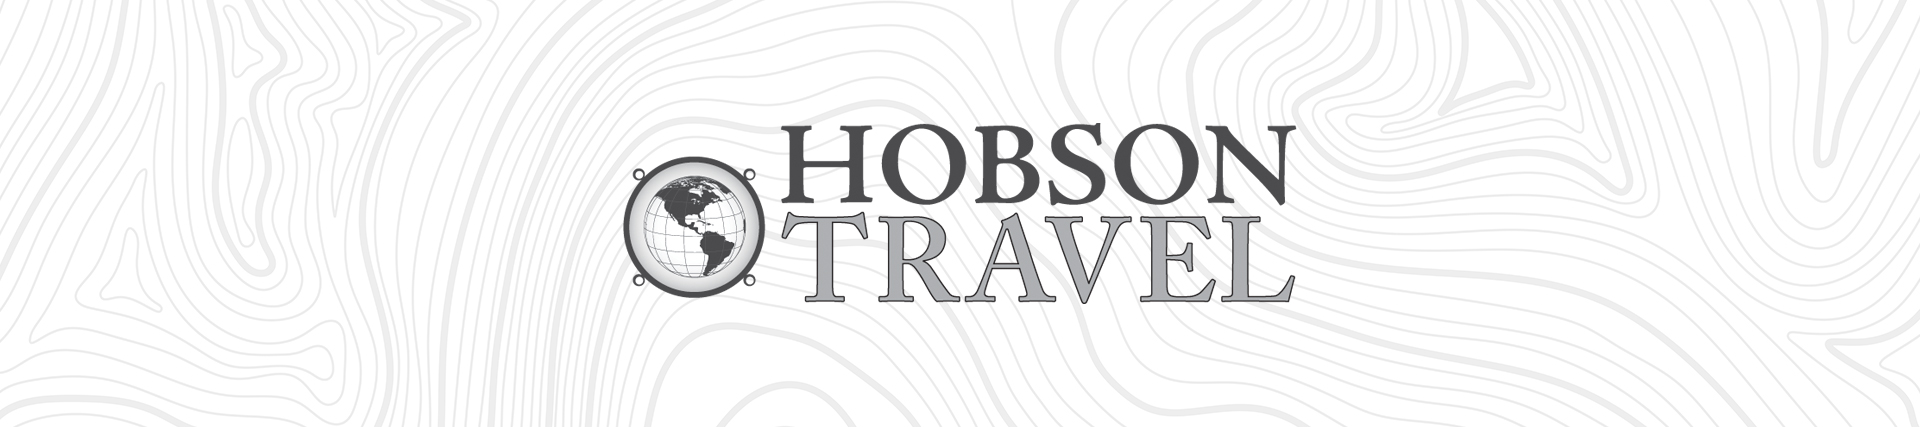 Direct Travel Continues Powerful Growth Mode with Acquisition of Hobson Travel